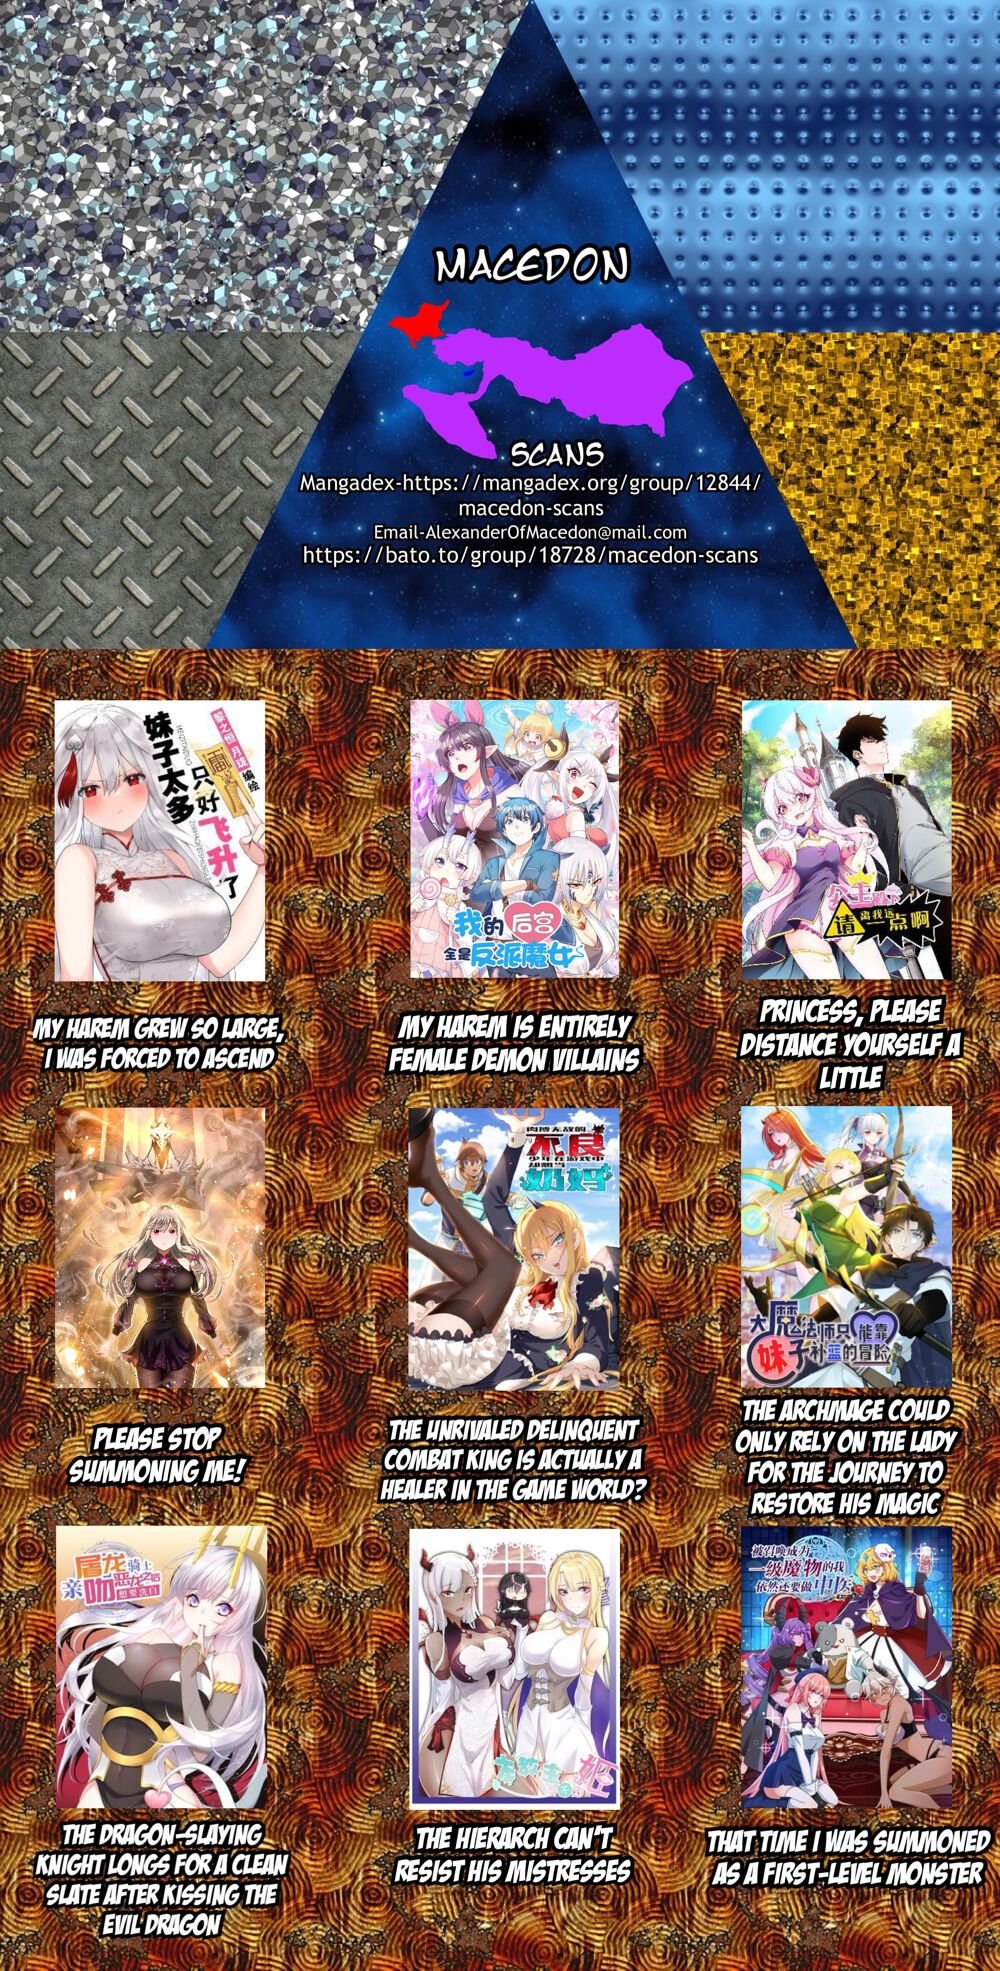 My Harem Is Entirely Female Demon Villains chapter 19